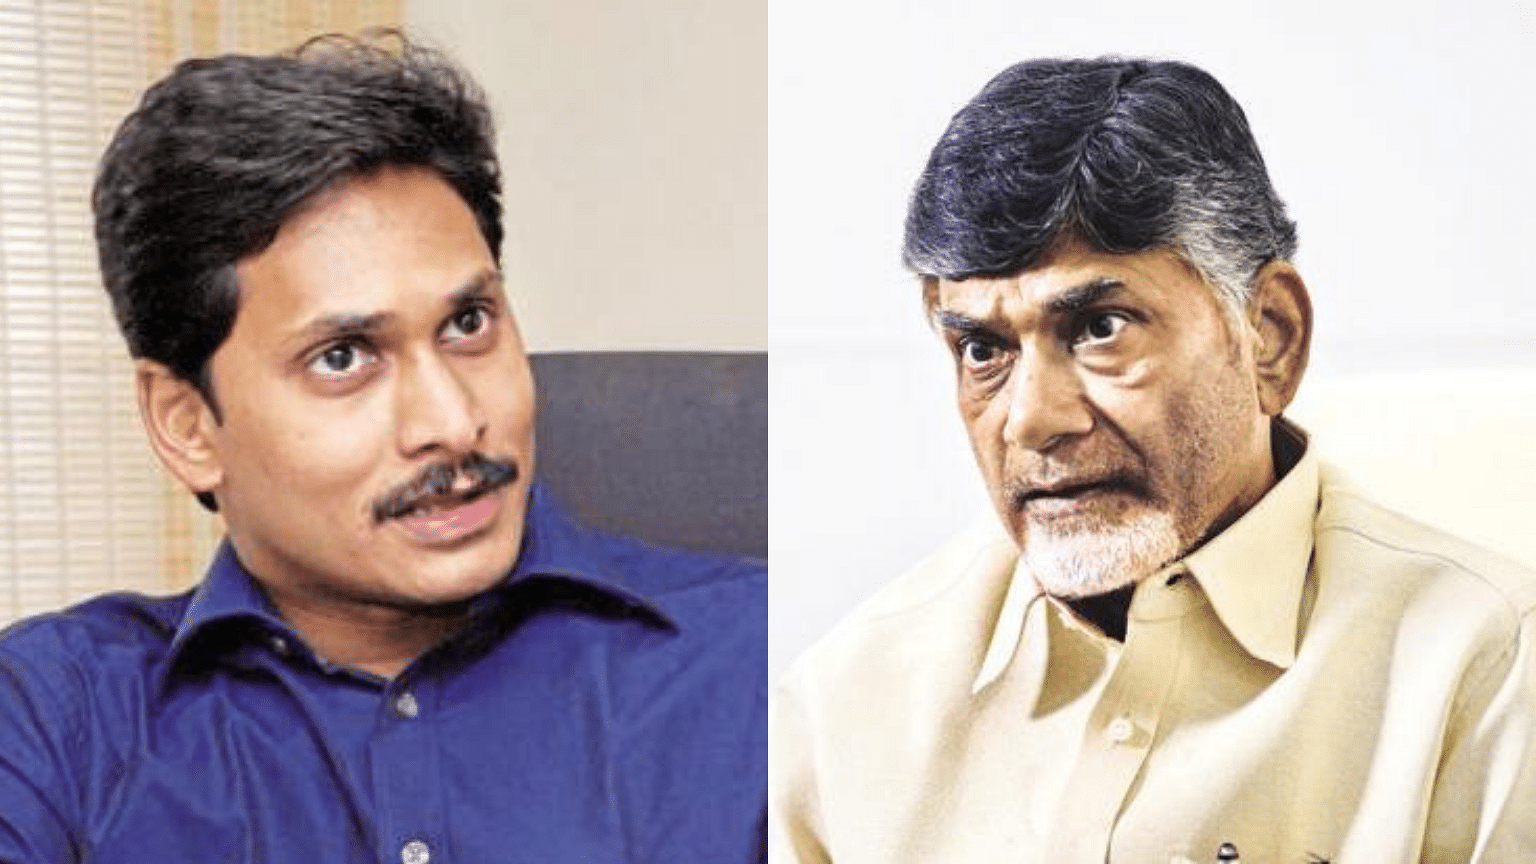 The Jagan Mohan Reddy-led Andhra Pradesh government on Tuesday, 25 June, began the demolition of ‘Praja Vedika’ – a building built as an extension to former Chief Minister Chandrababu Naidu’s residence. &nbsp;